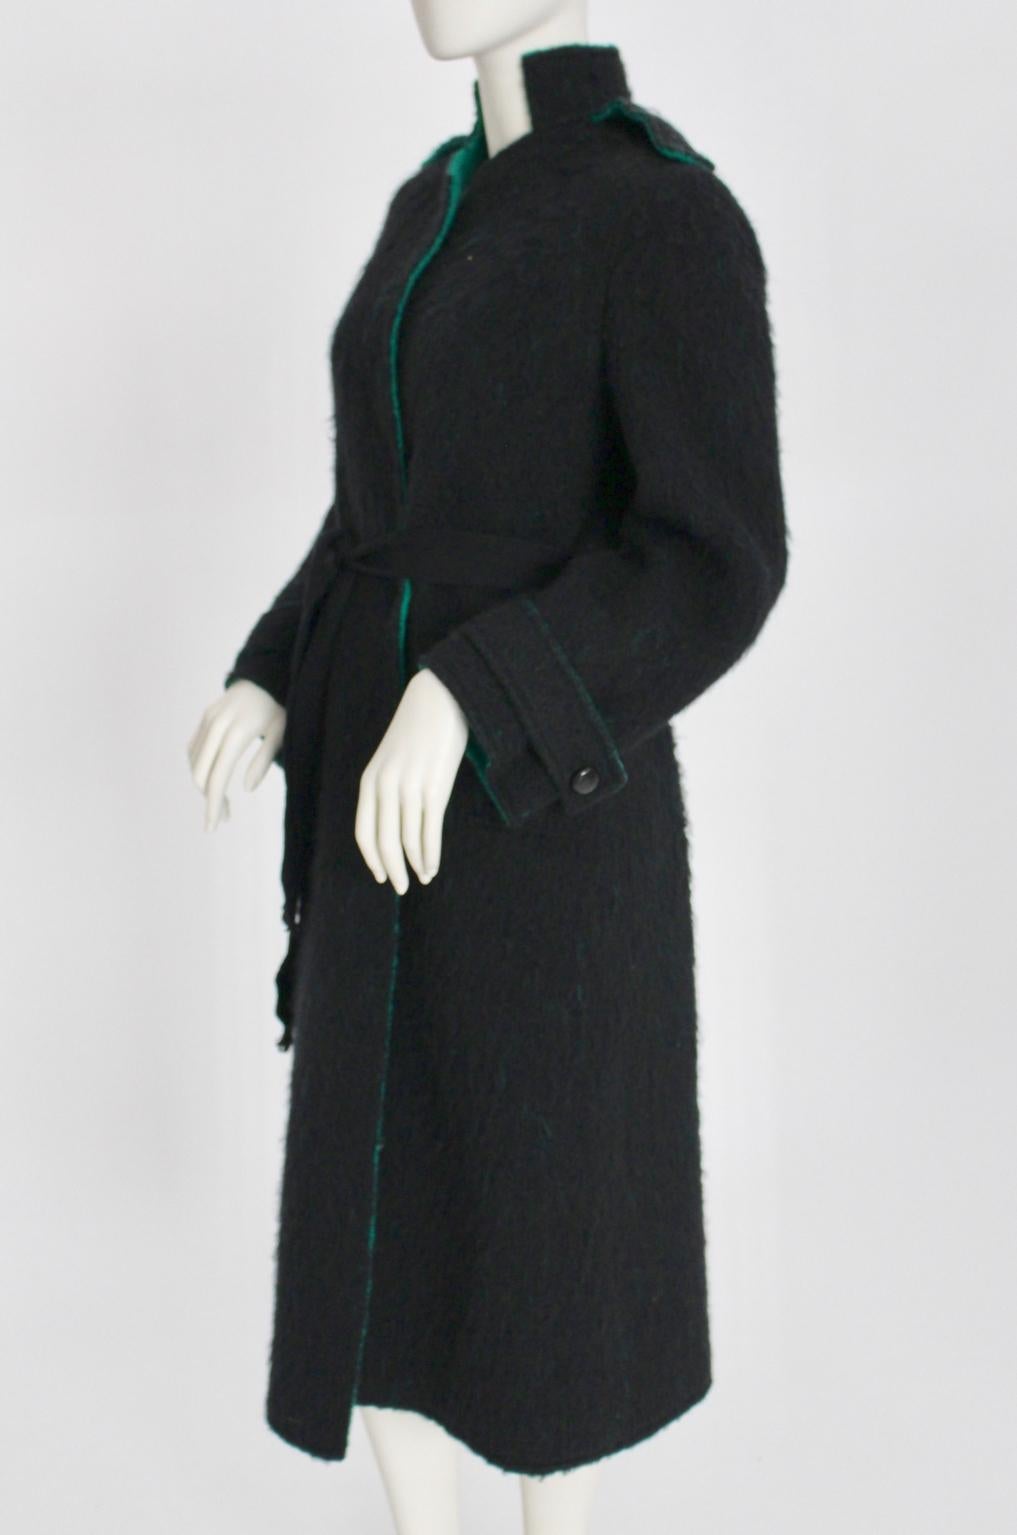 This woolen coat in the colors black and emerald green is a great vintage piece from the 1970s.
The coat features a standing collar and two side pockets.
On the sleeves and on the shoulders are one-buttoned cuffs.
The coat is belted.
Best fit for